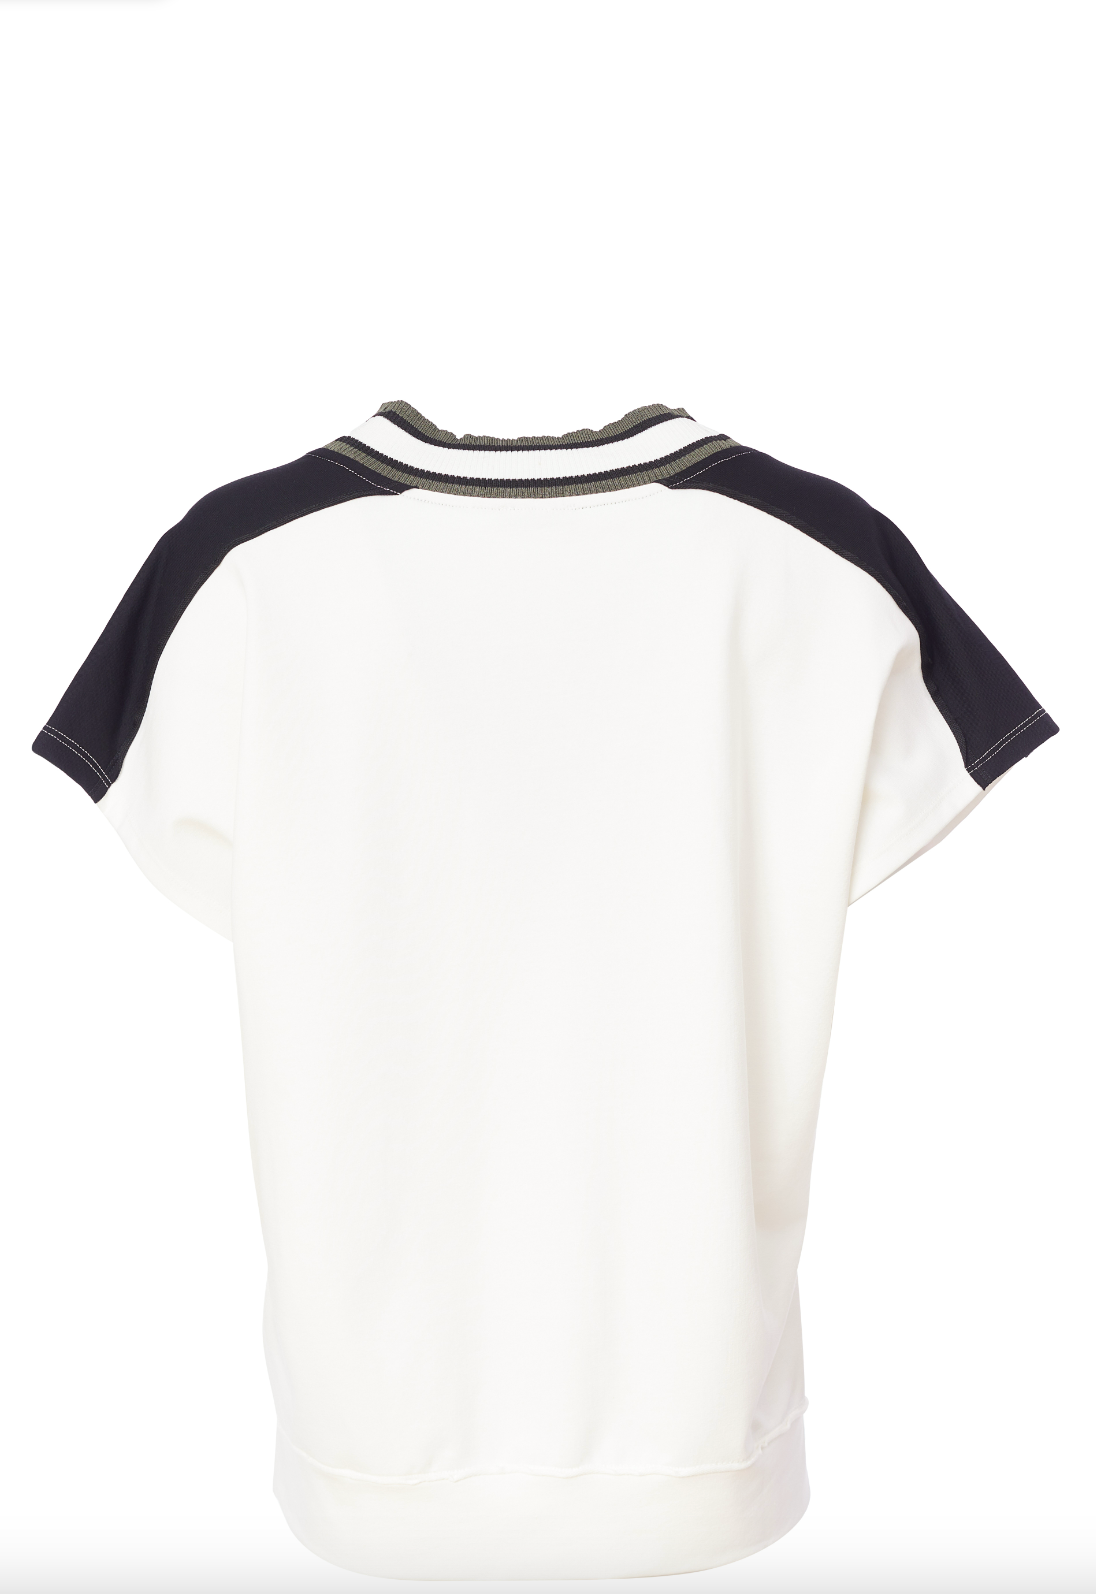 Vee Neck Top with Knit Trim